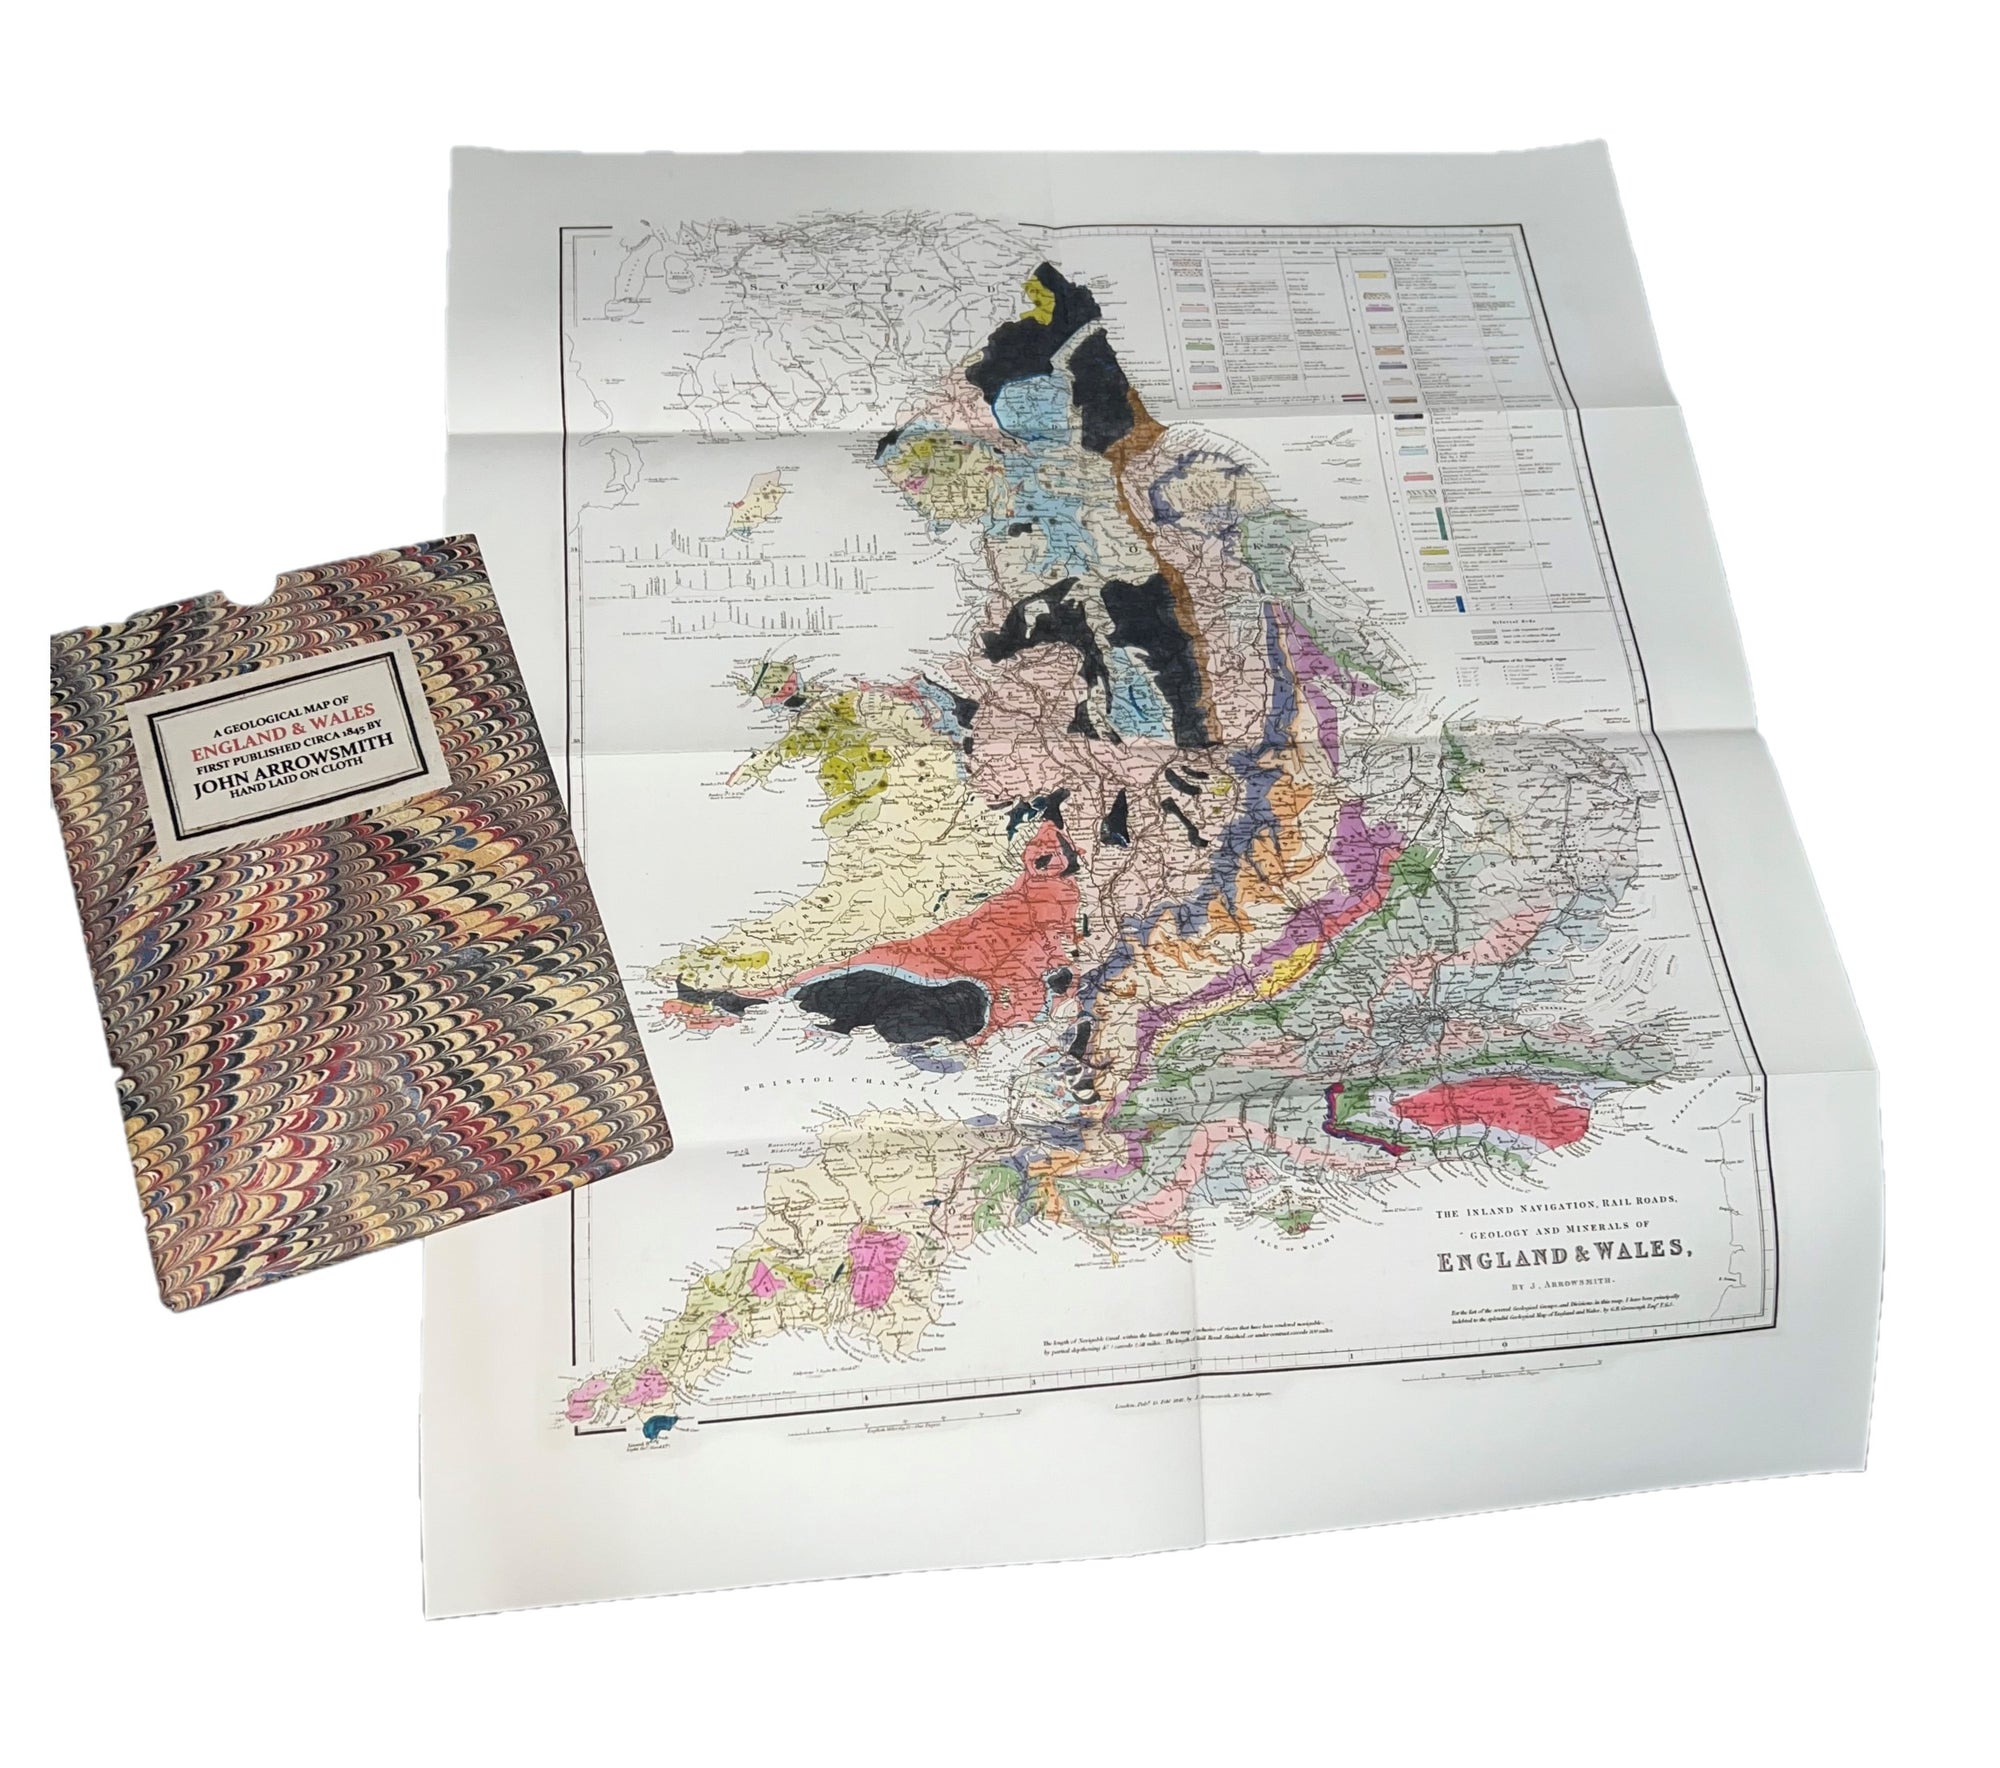 Geological Map of England and Wales circa 1845